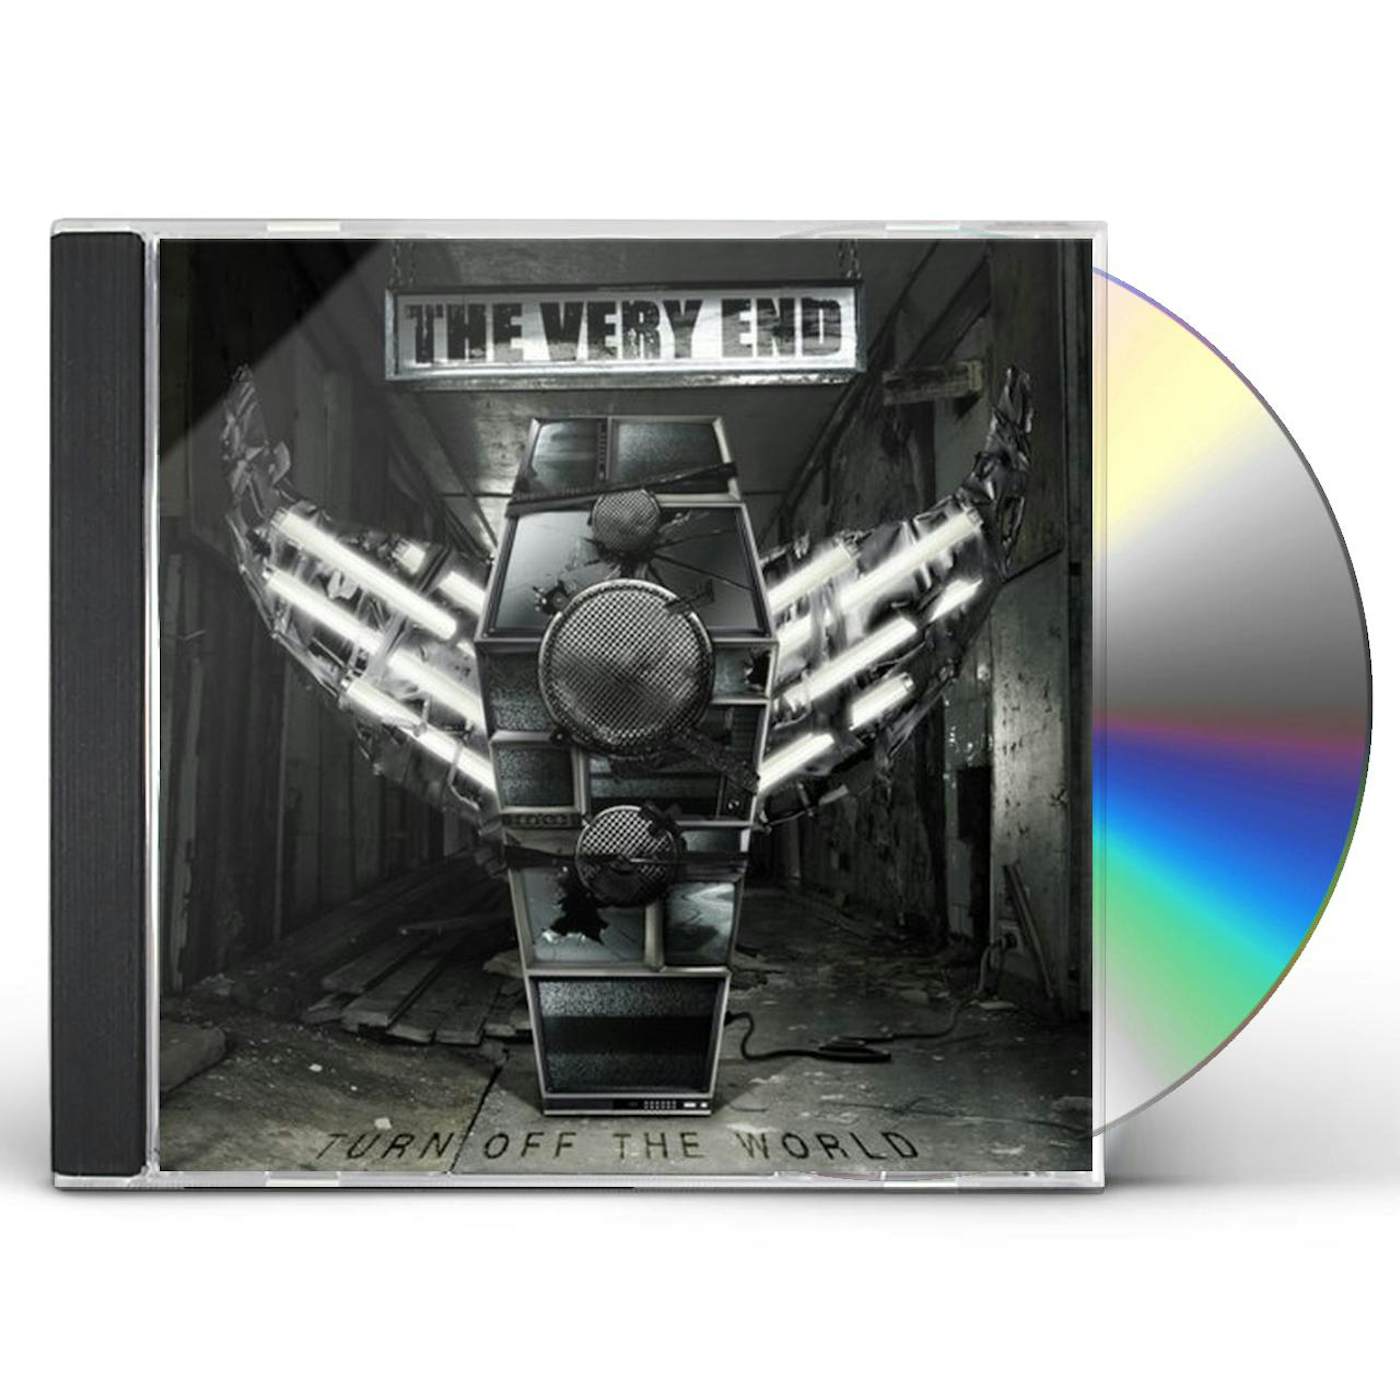 The Very End TURN OFF THE WORLD CD